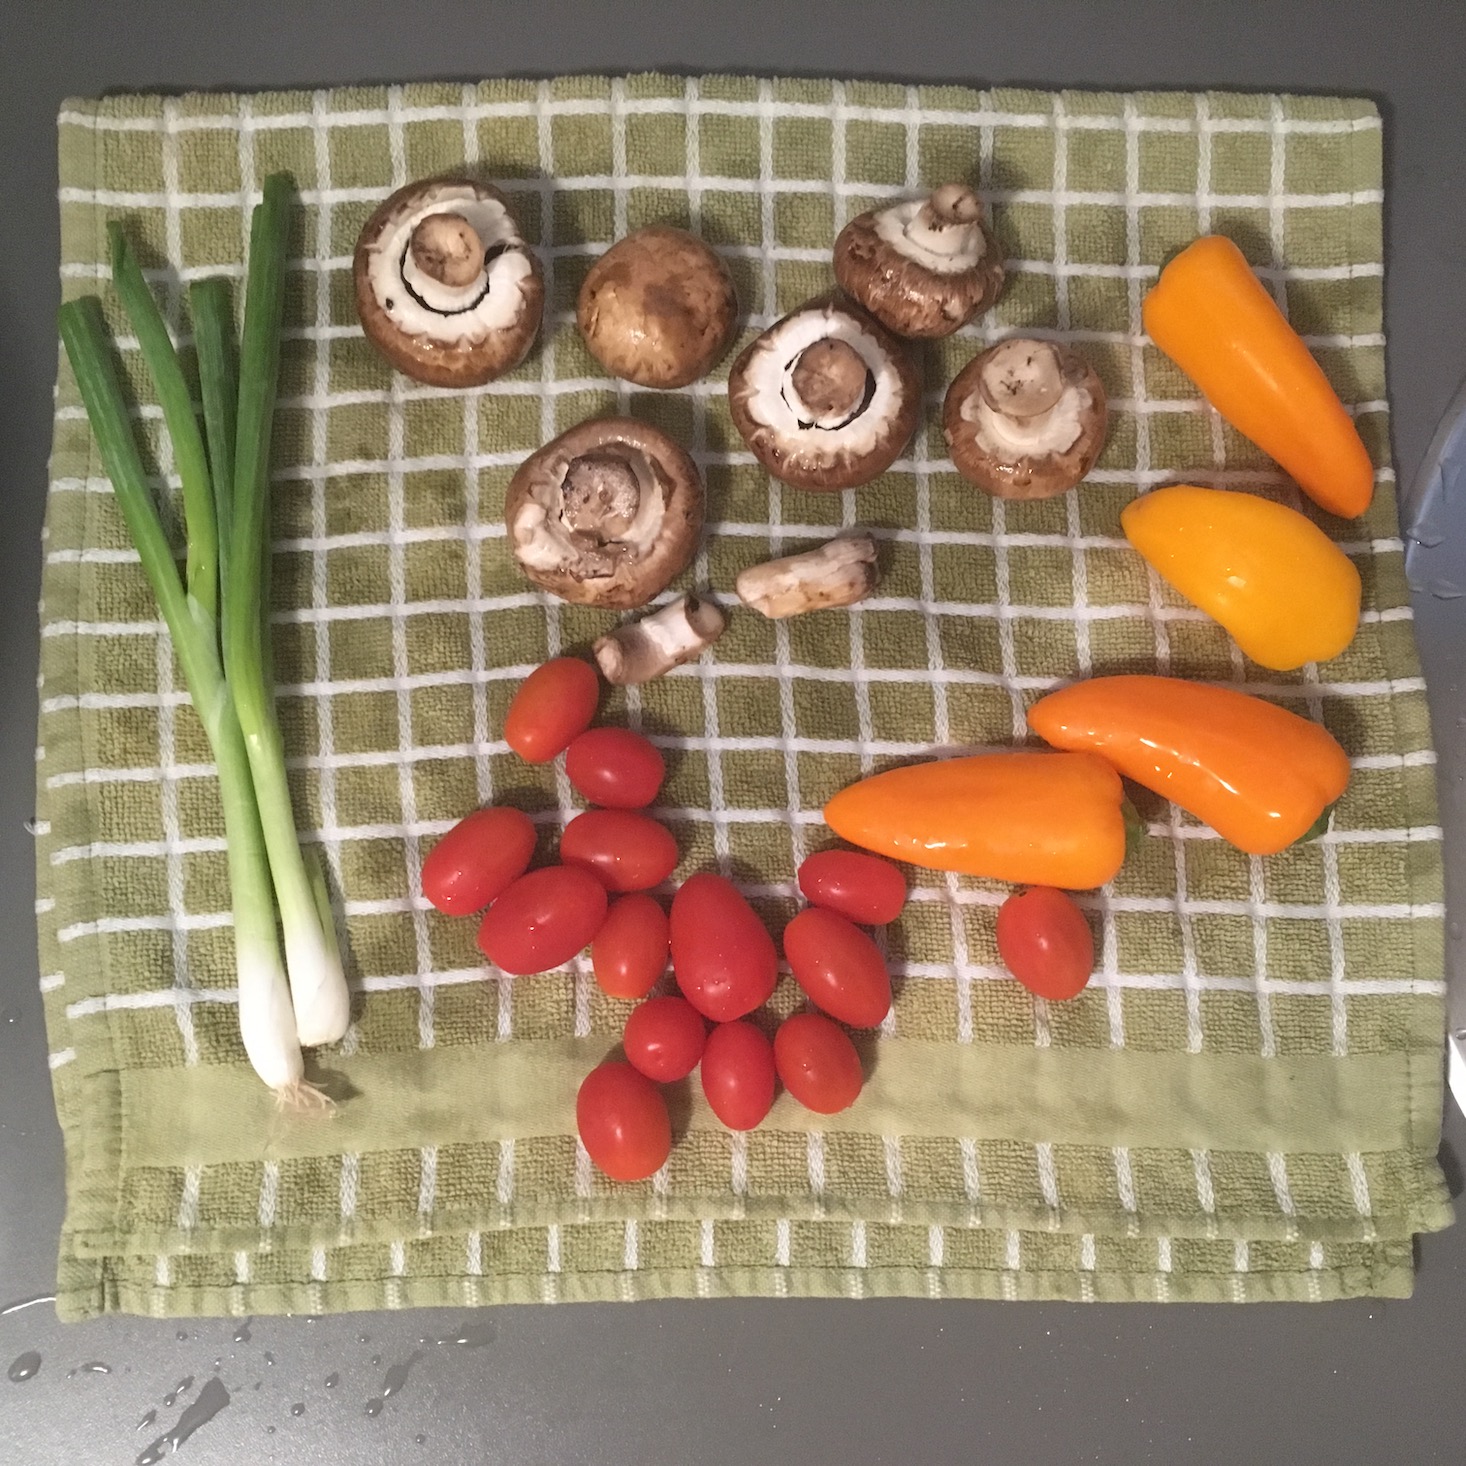 spicy egg and vegetable skillet produce drying on a kitchen towel